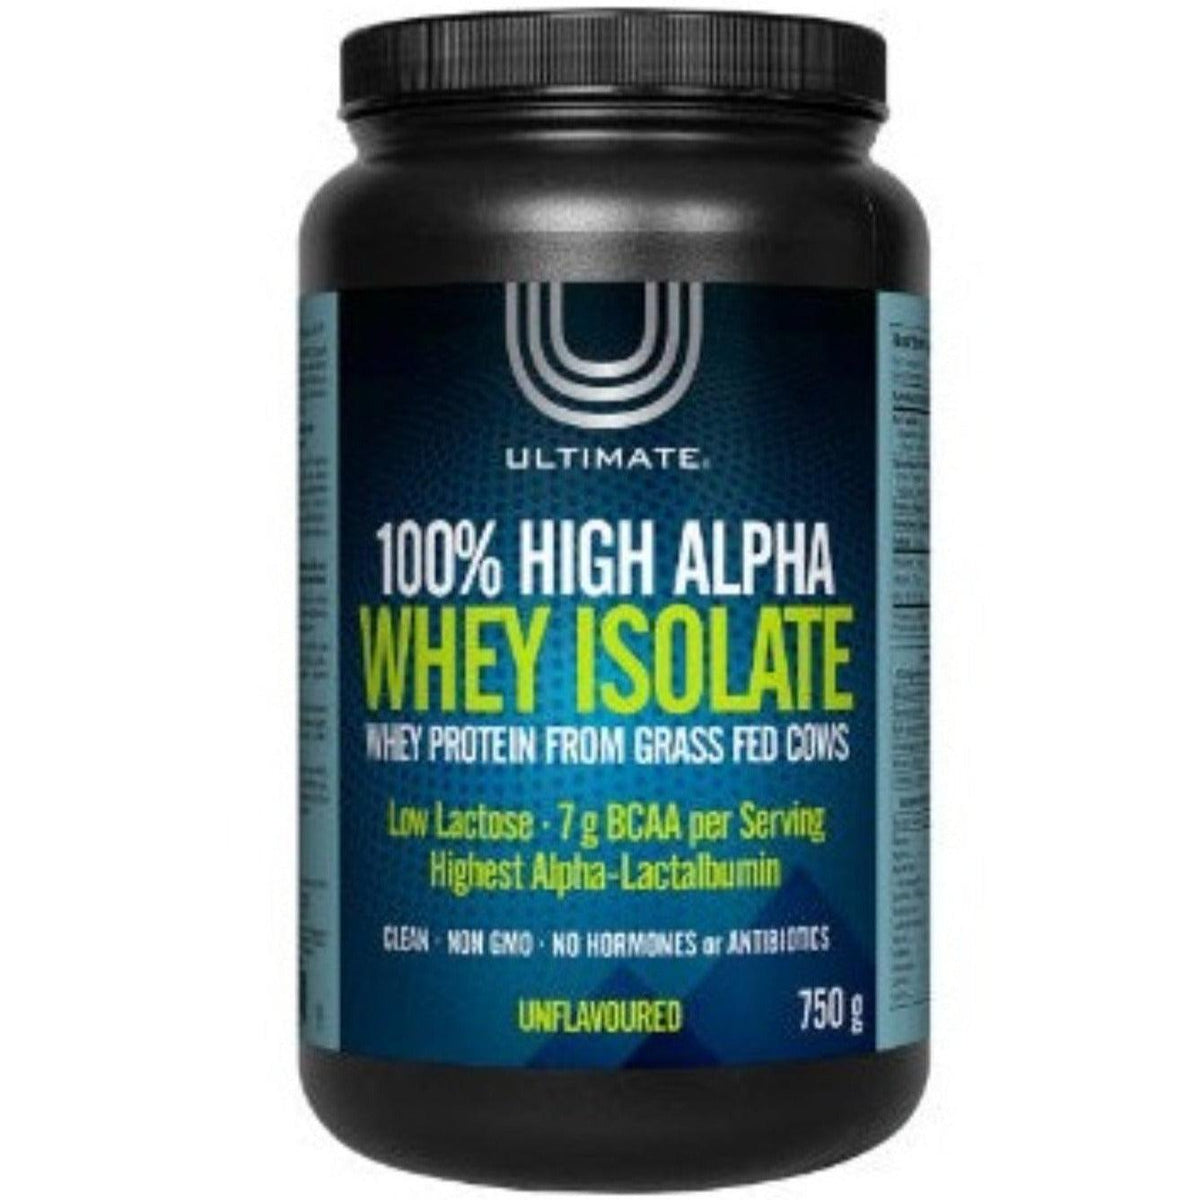 Ultimate High Alpha Whey Protein Unflavoured 750G Supplements - Protein at Village Vitamin Store